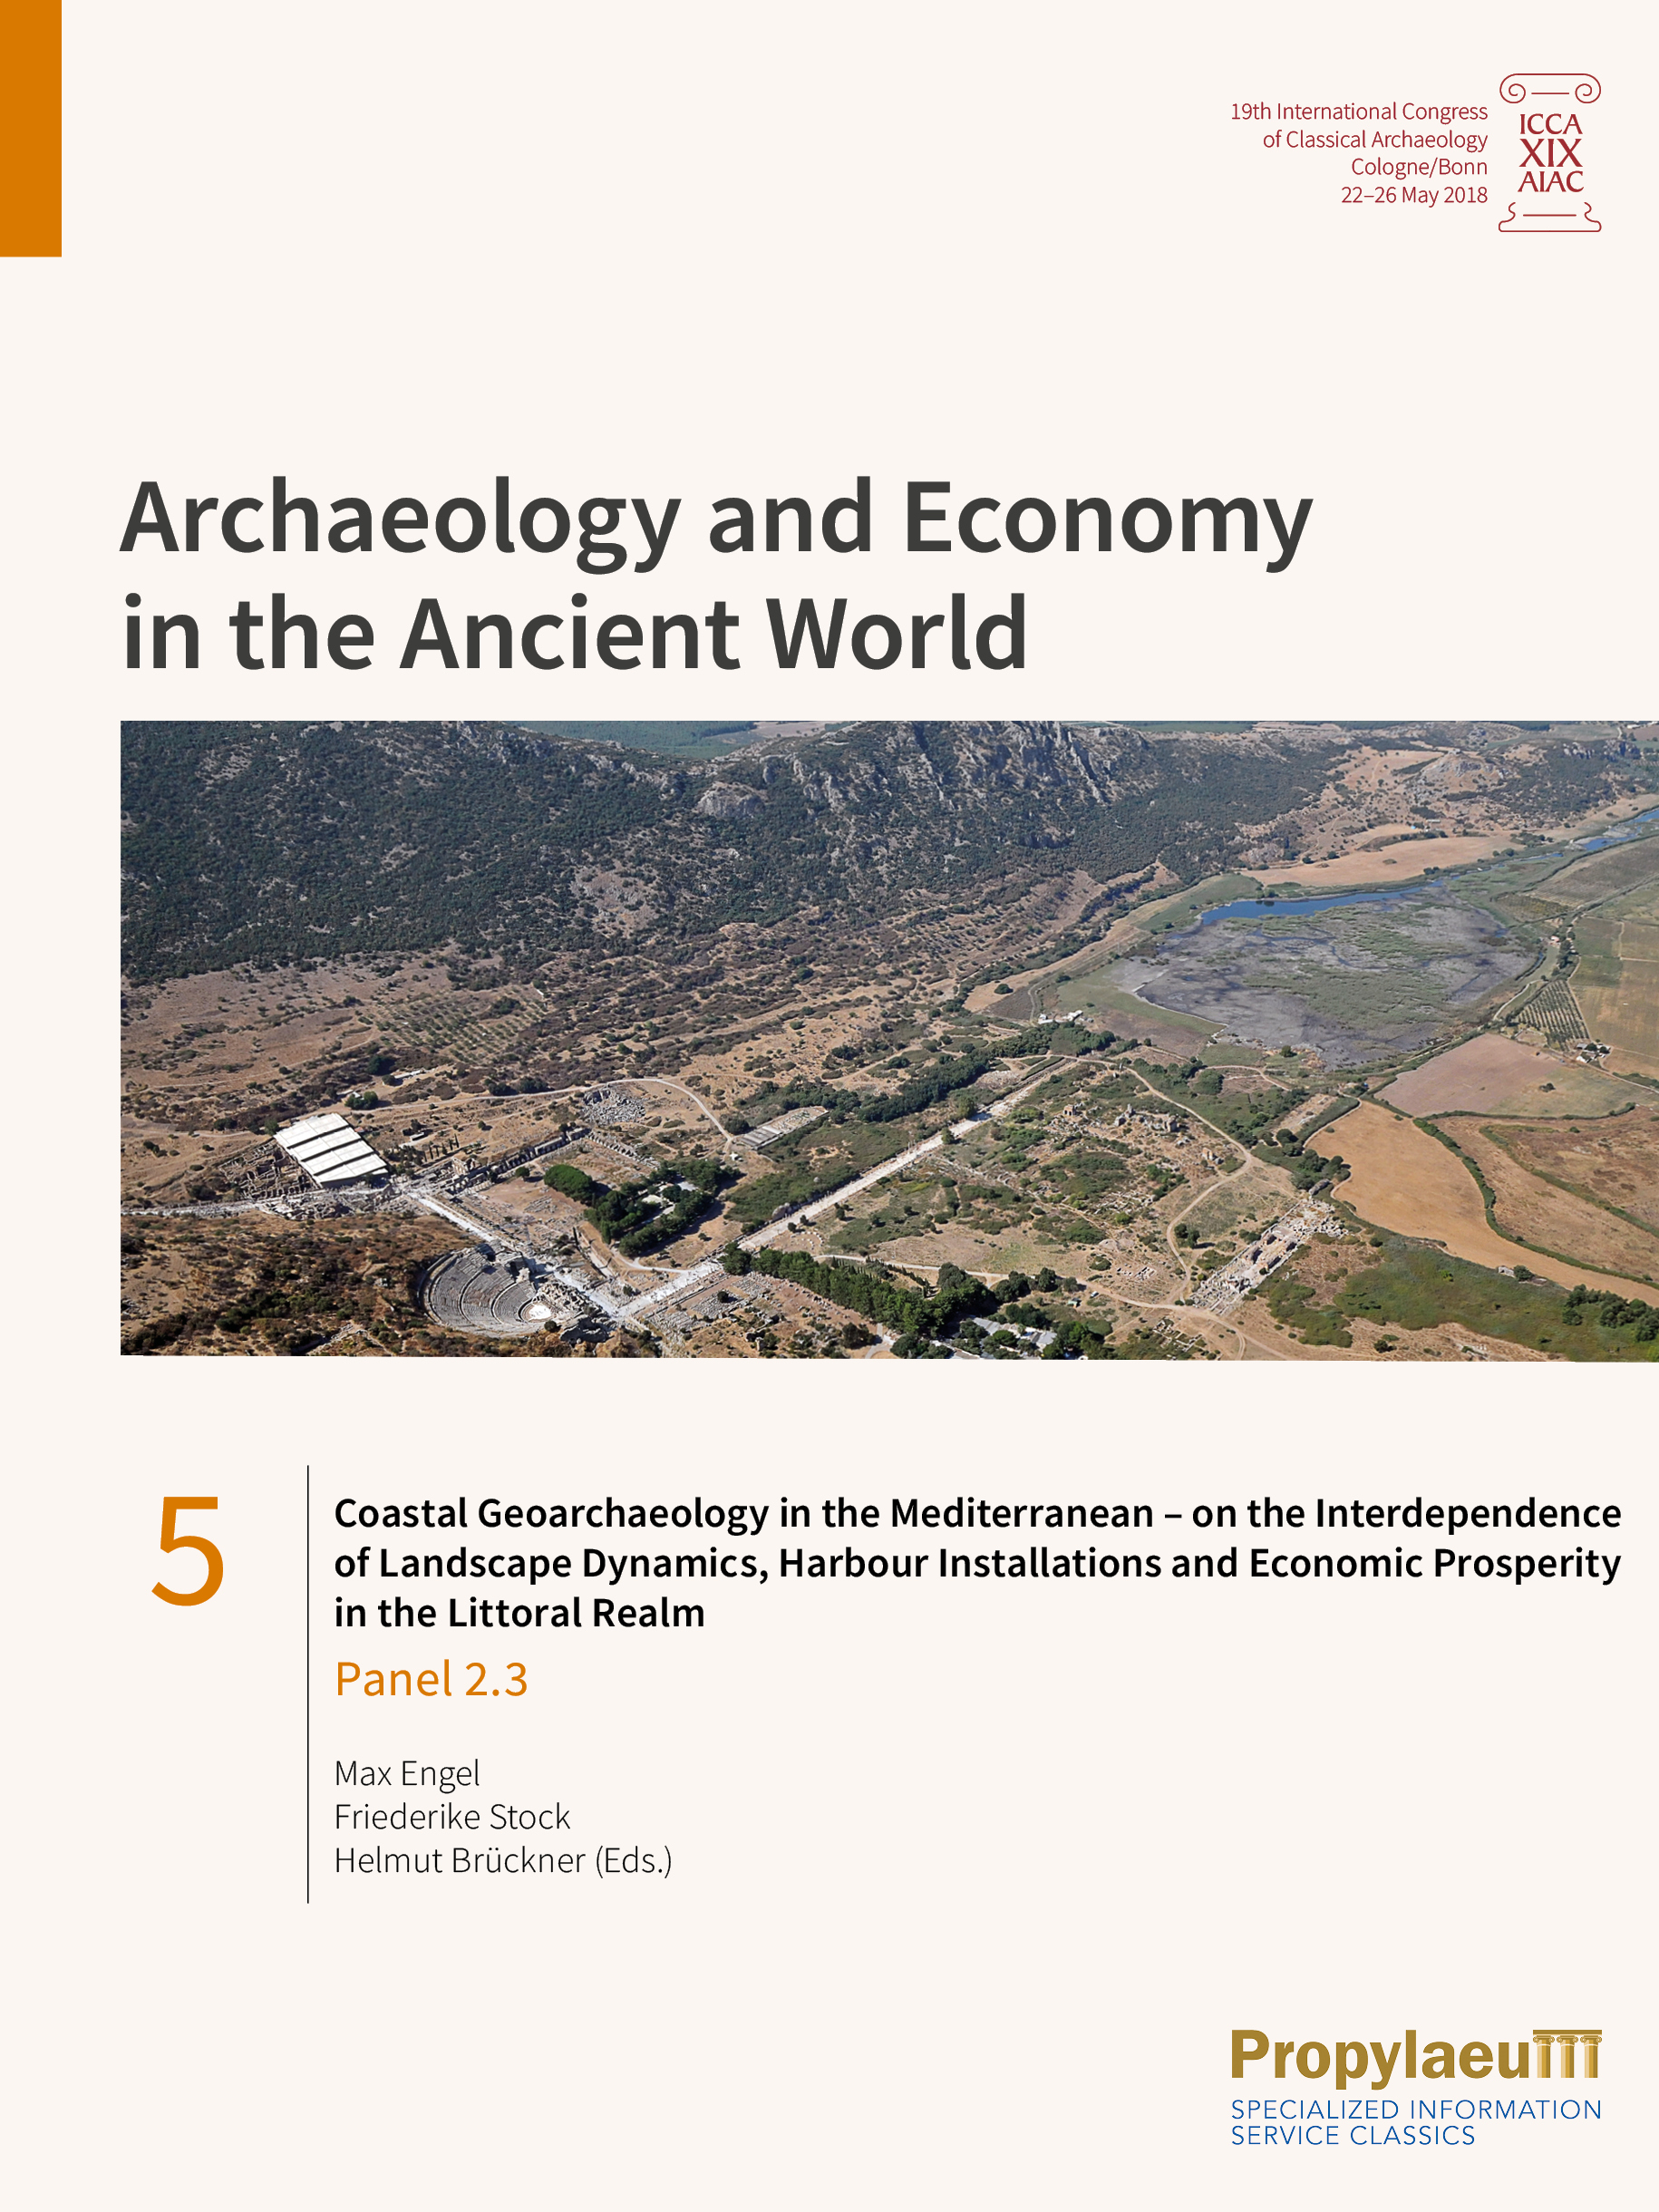 Cover: Coastal Geoarchaeology in the Mediterranean – on the Interdependence of Landscape Dynamics, Harbour Installations and Economic Prosperity in the Littoral Realm